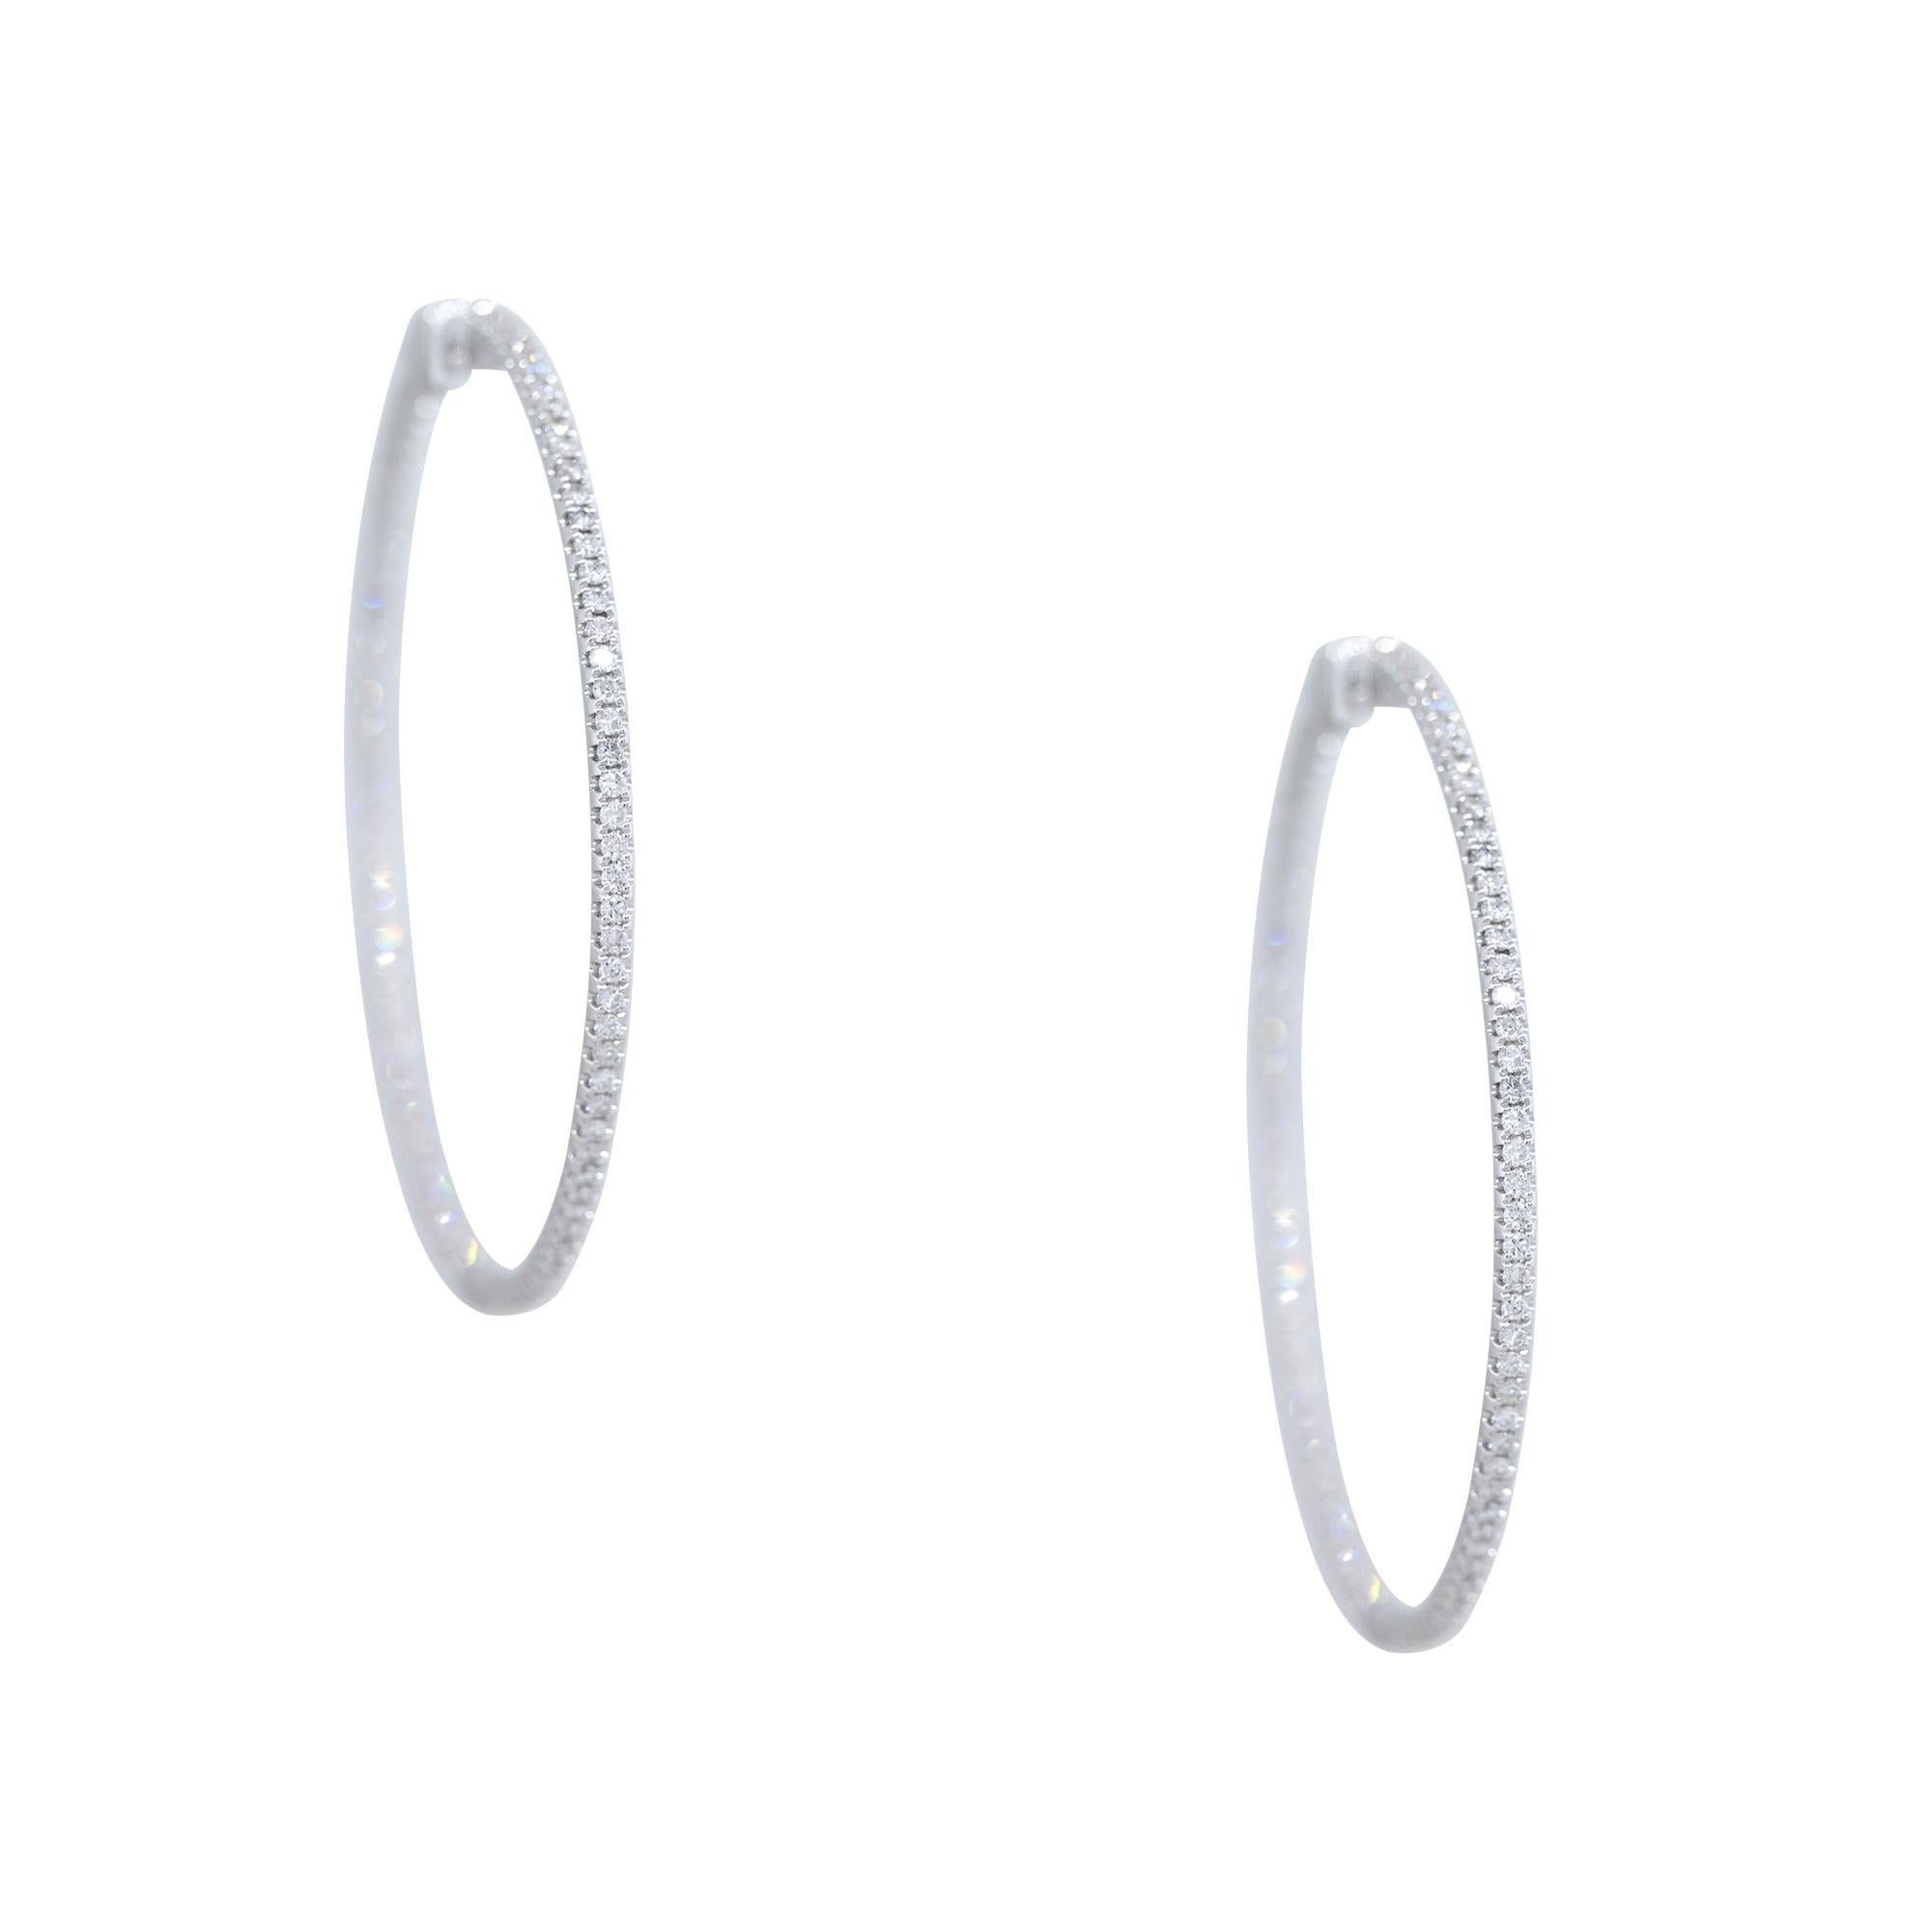 18 Karat White Gold 1.92 Carat Round Brilliant Cut Diamond Large Hoop Earrings

Material: 18k White Gold
Diamond Details: There are approximately 1.92 carats of Round Brilliant cut Diamonds. 
Diamond Color: All diamonds are approximately G/H in